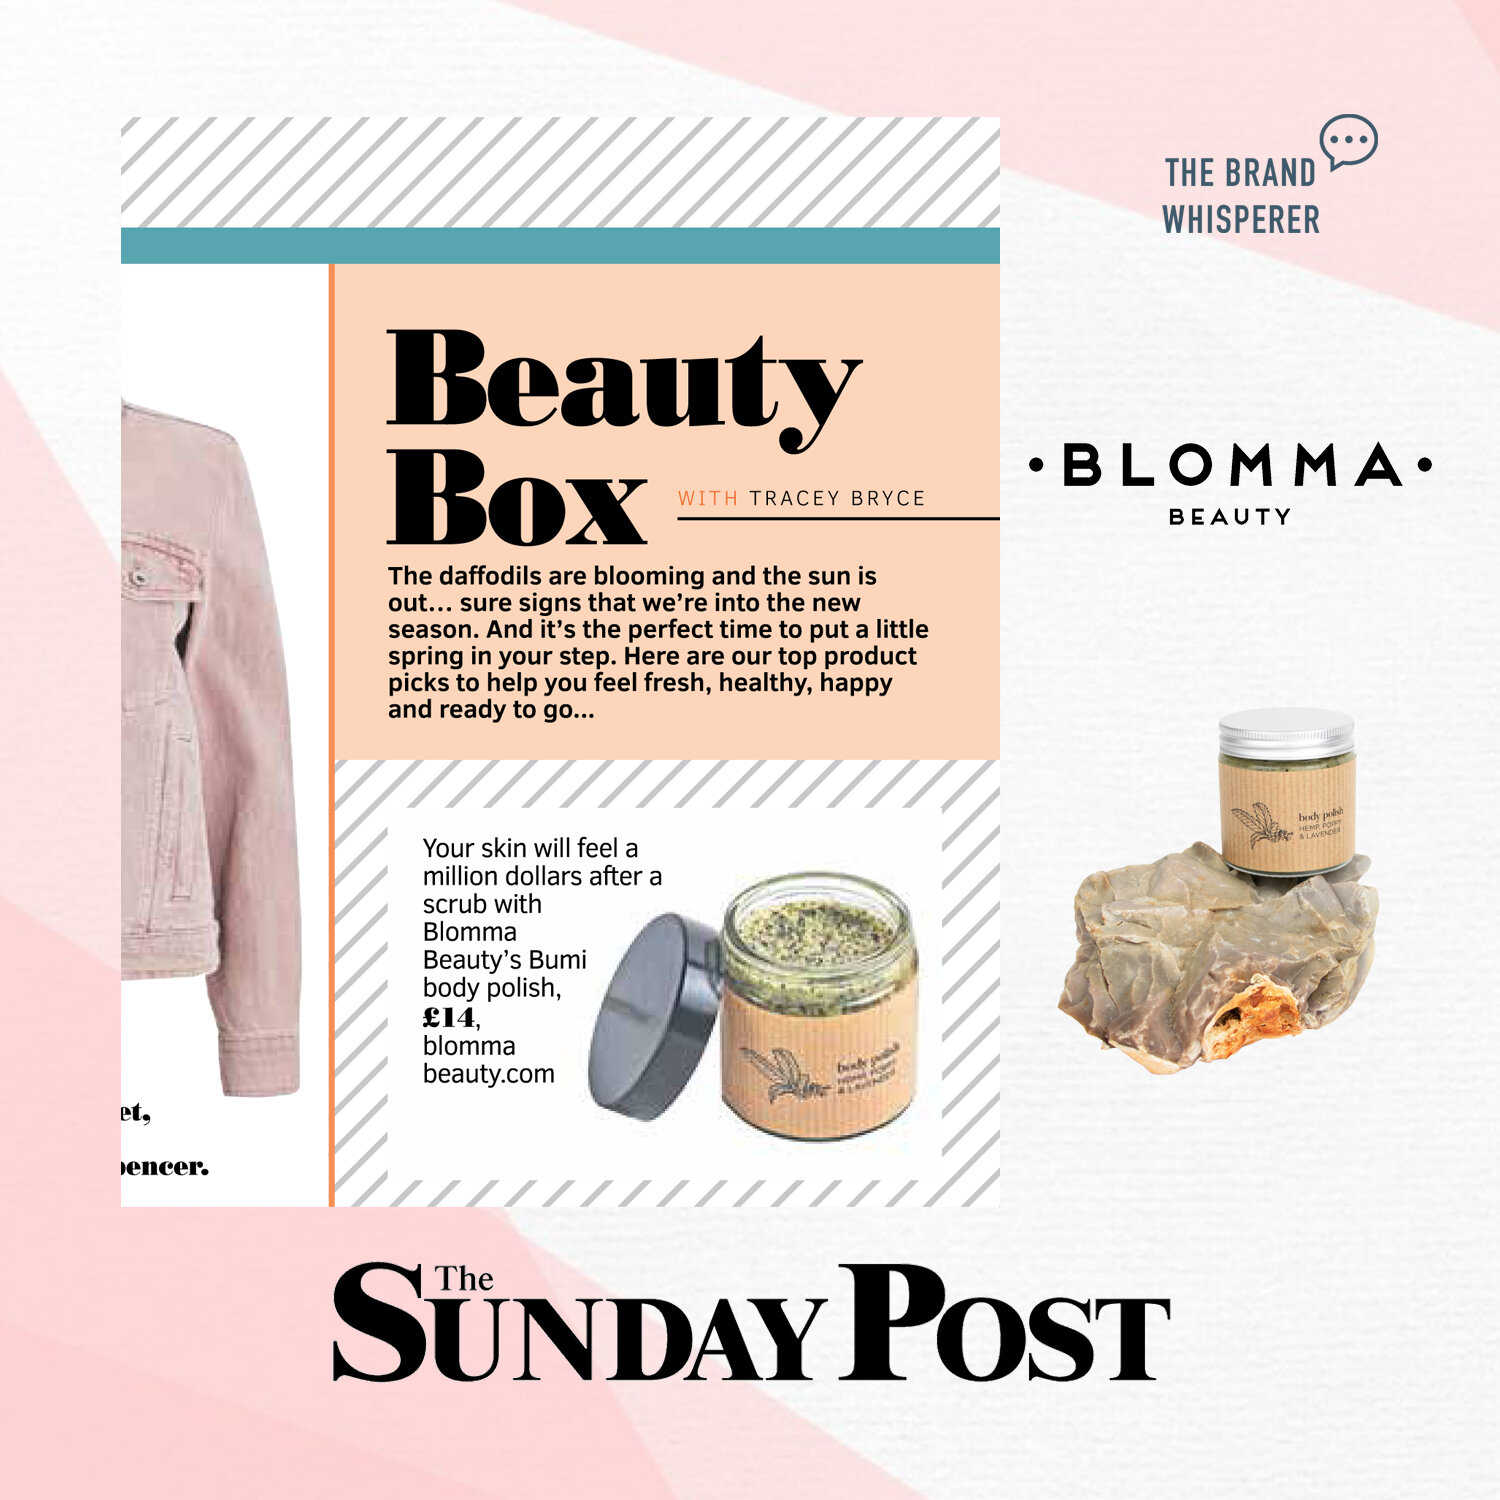 BLOMMA Beauty in The Sunday Post, March 2021